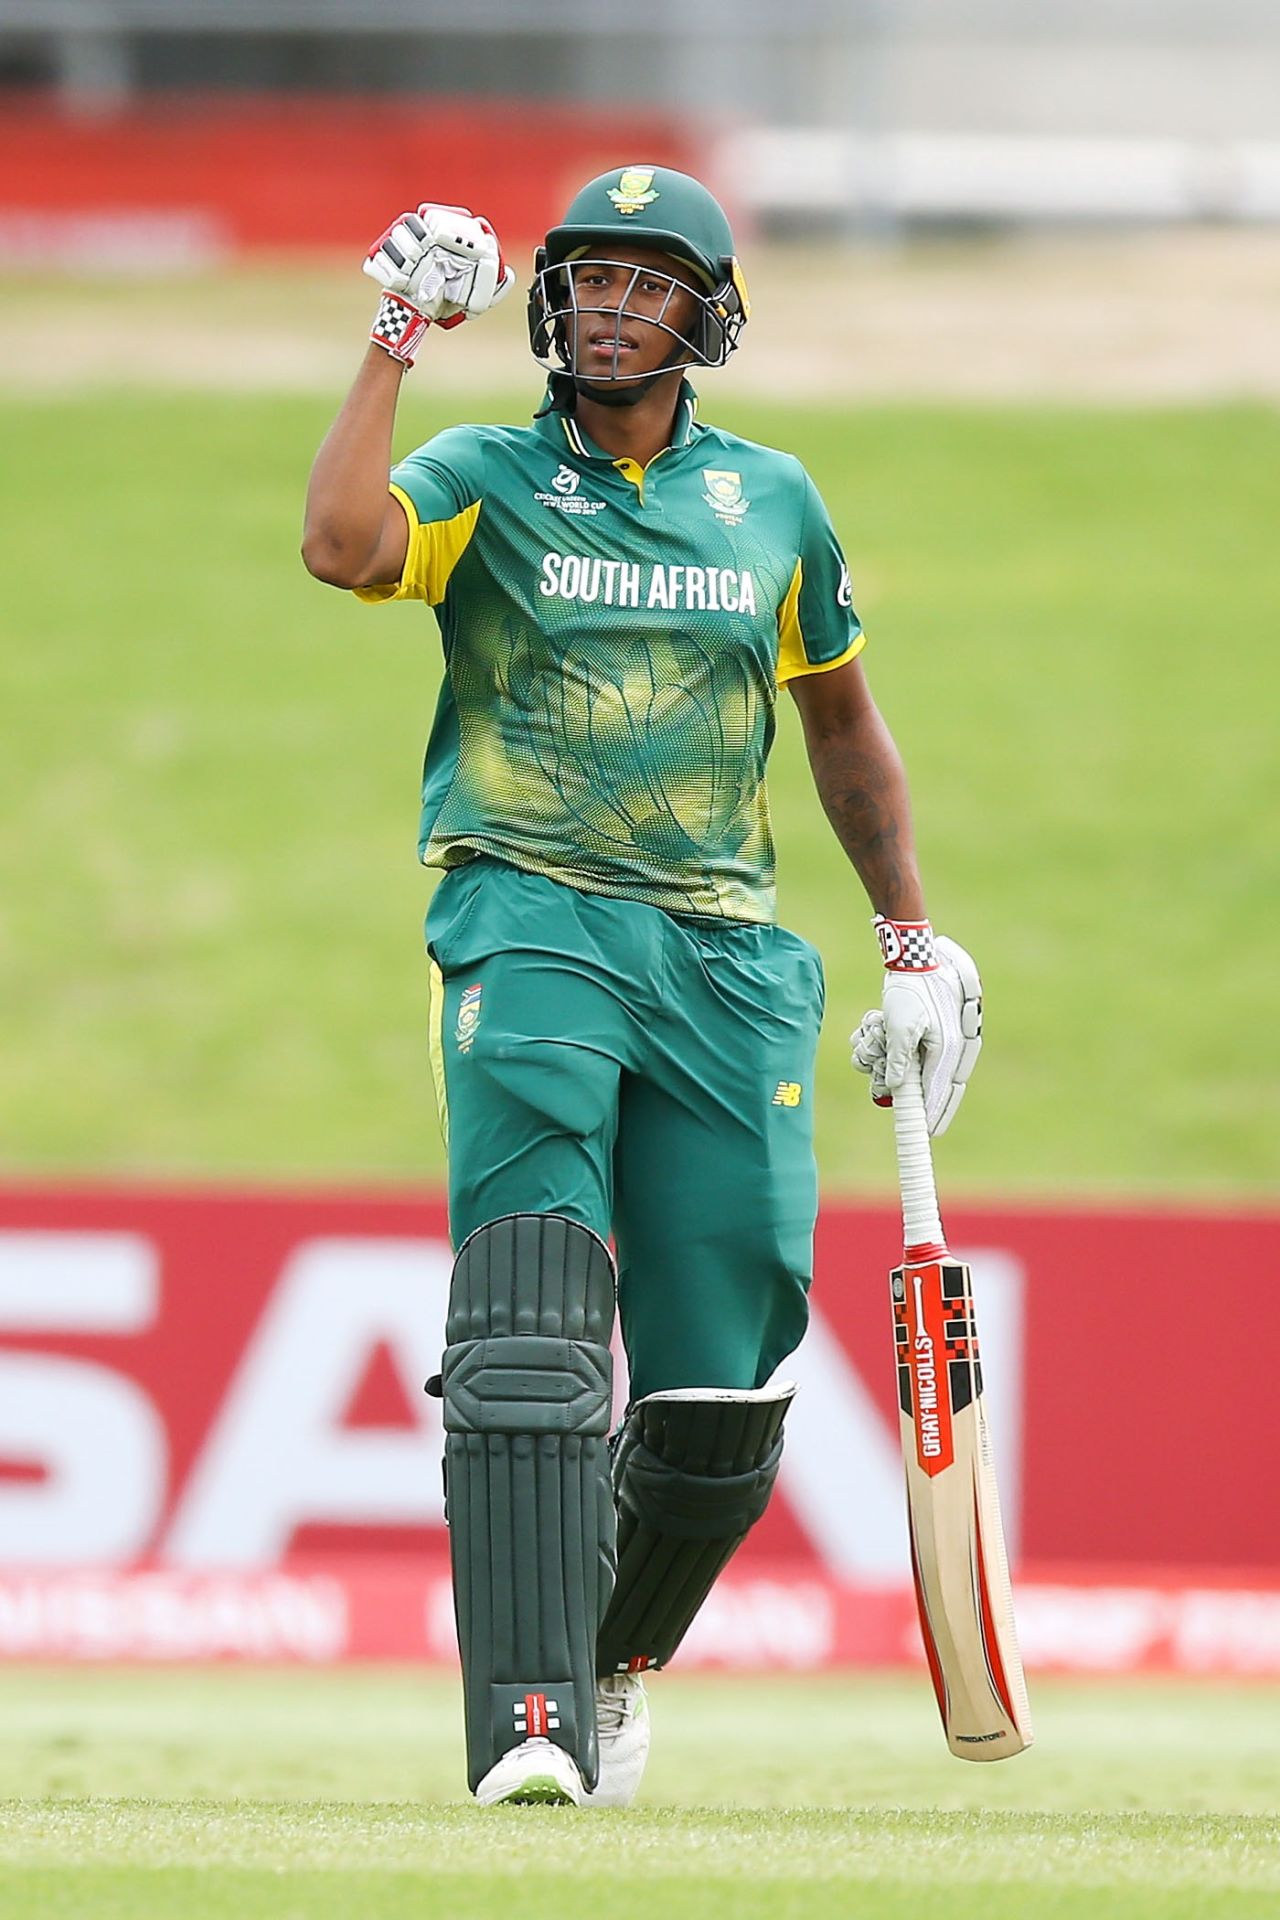 Wandile Makwetu unleashed an onslaught, South Africa v West Indies, Under-19 World Cup, Group A, Mount Maunganui, January 17, 208